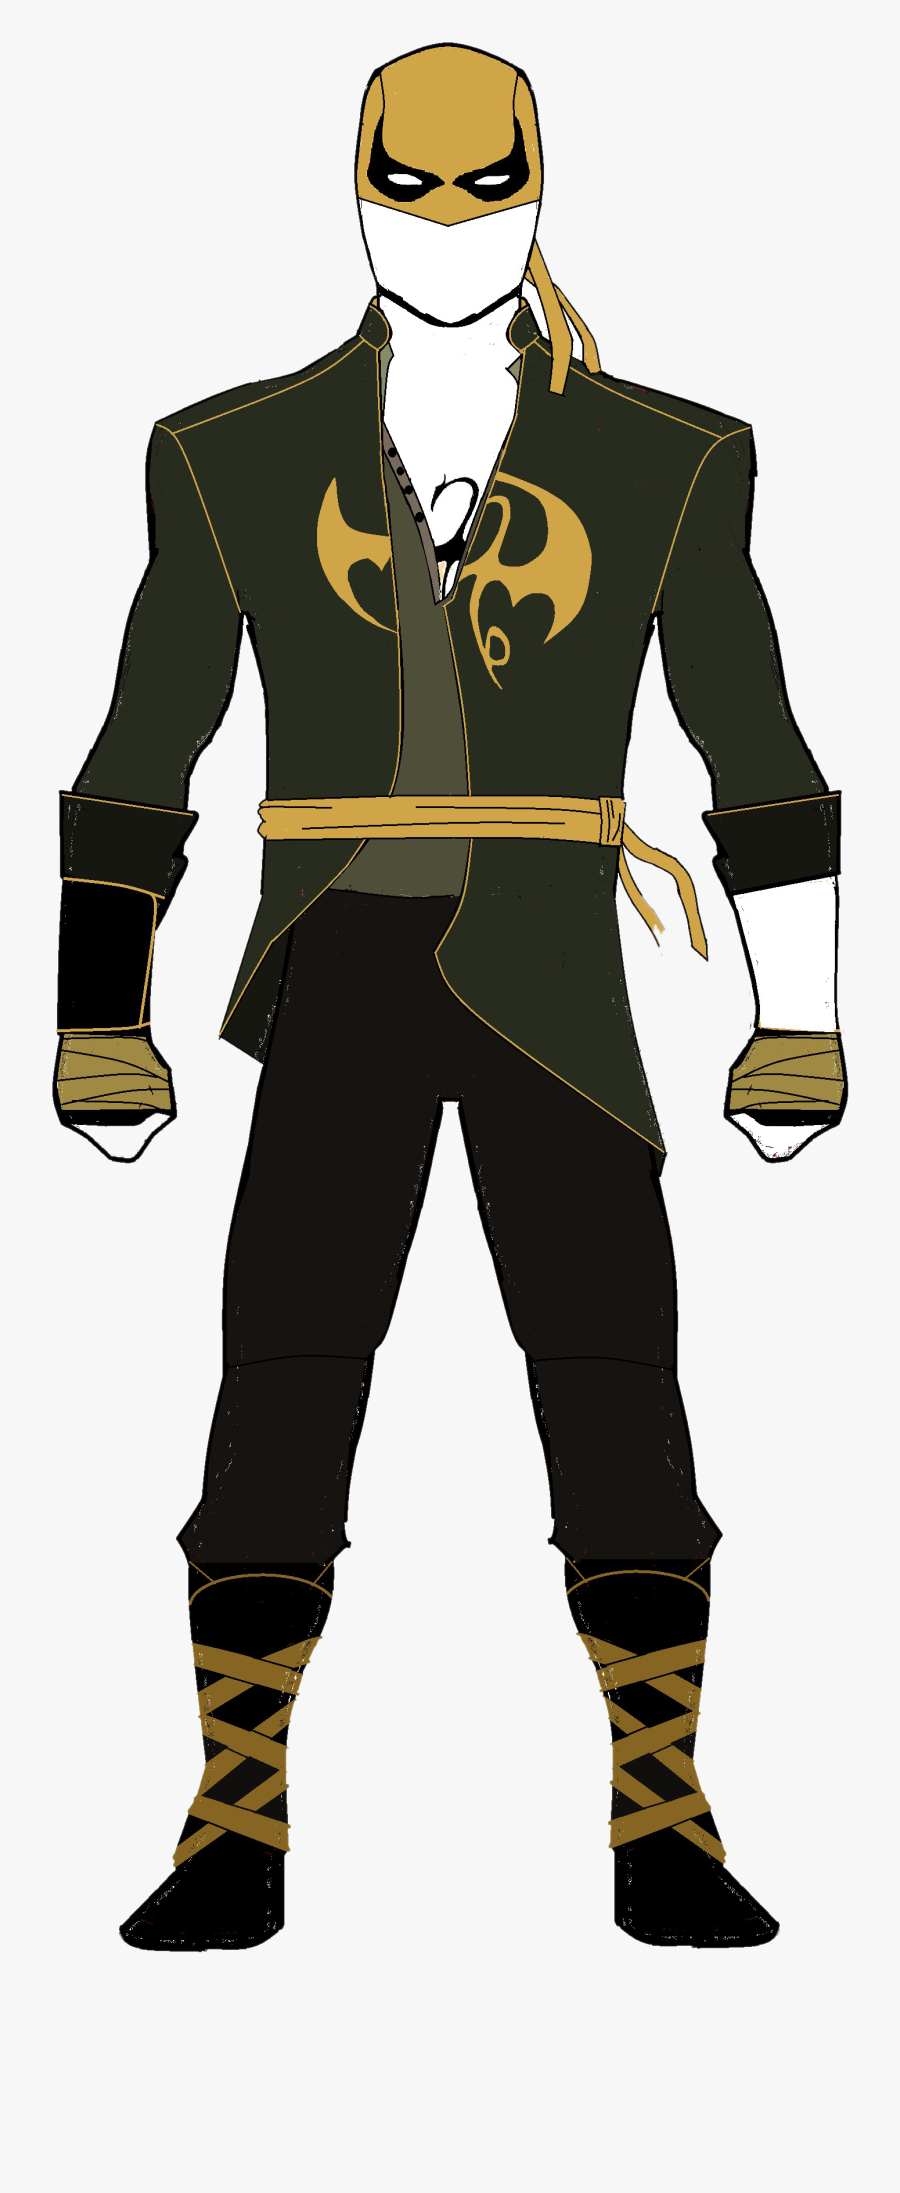 Iron Fist Png Images Hd - Iron Fist Mcu Costume, Transparent Clipart